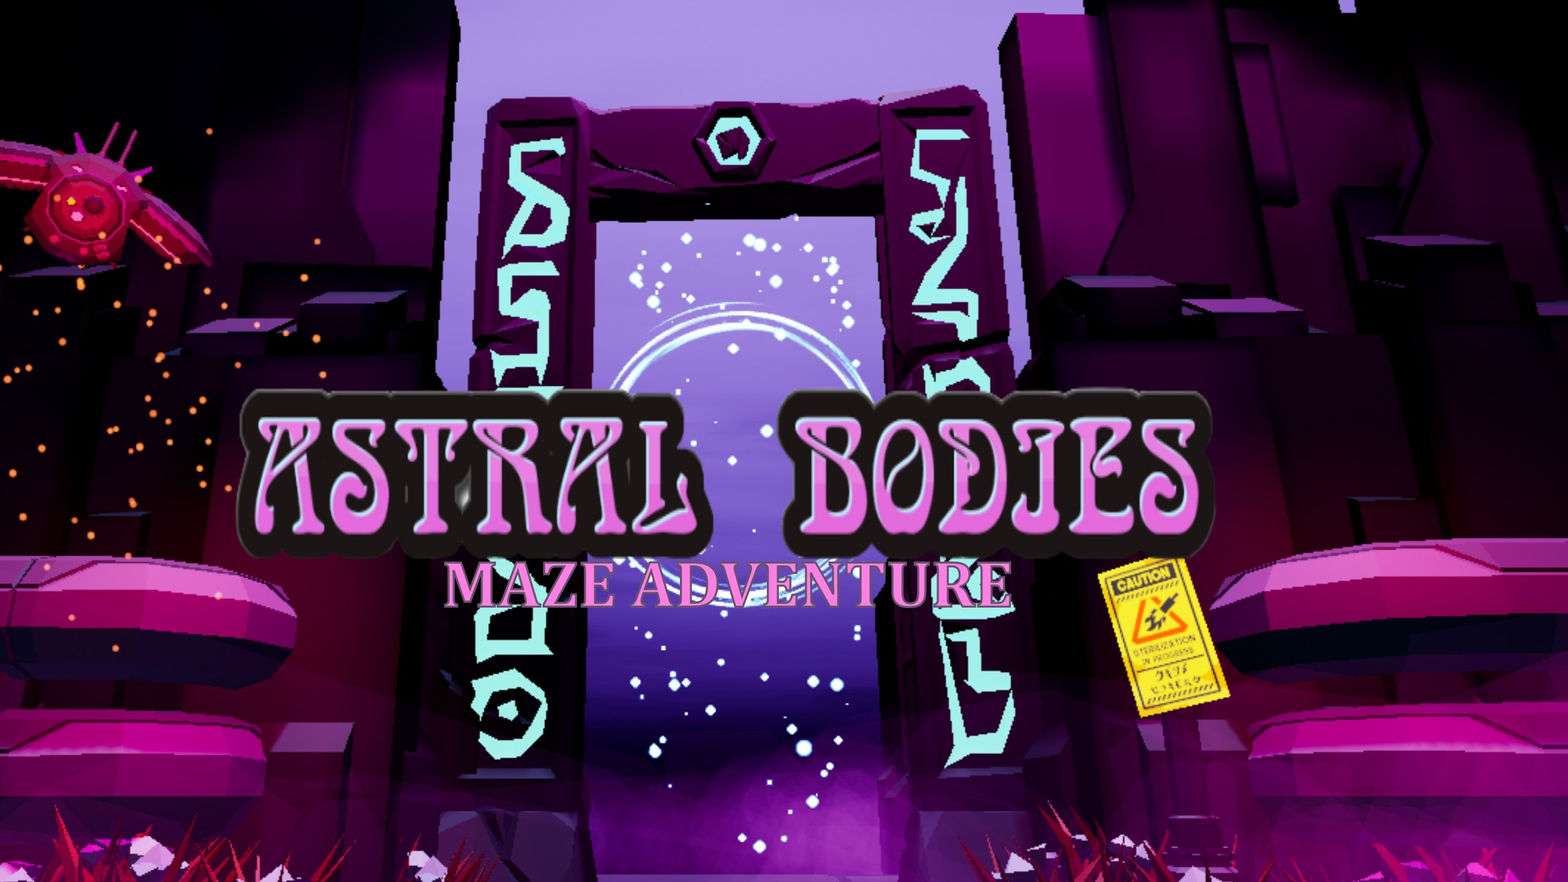 Astral Bodies